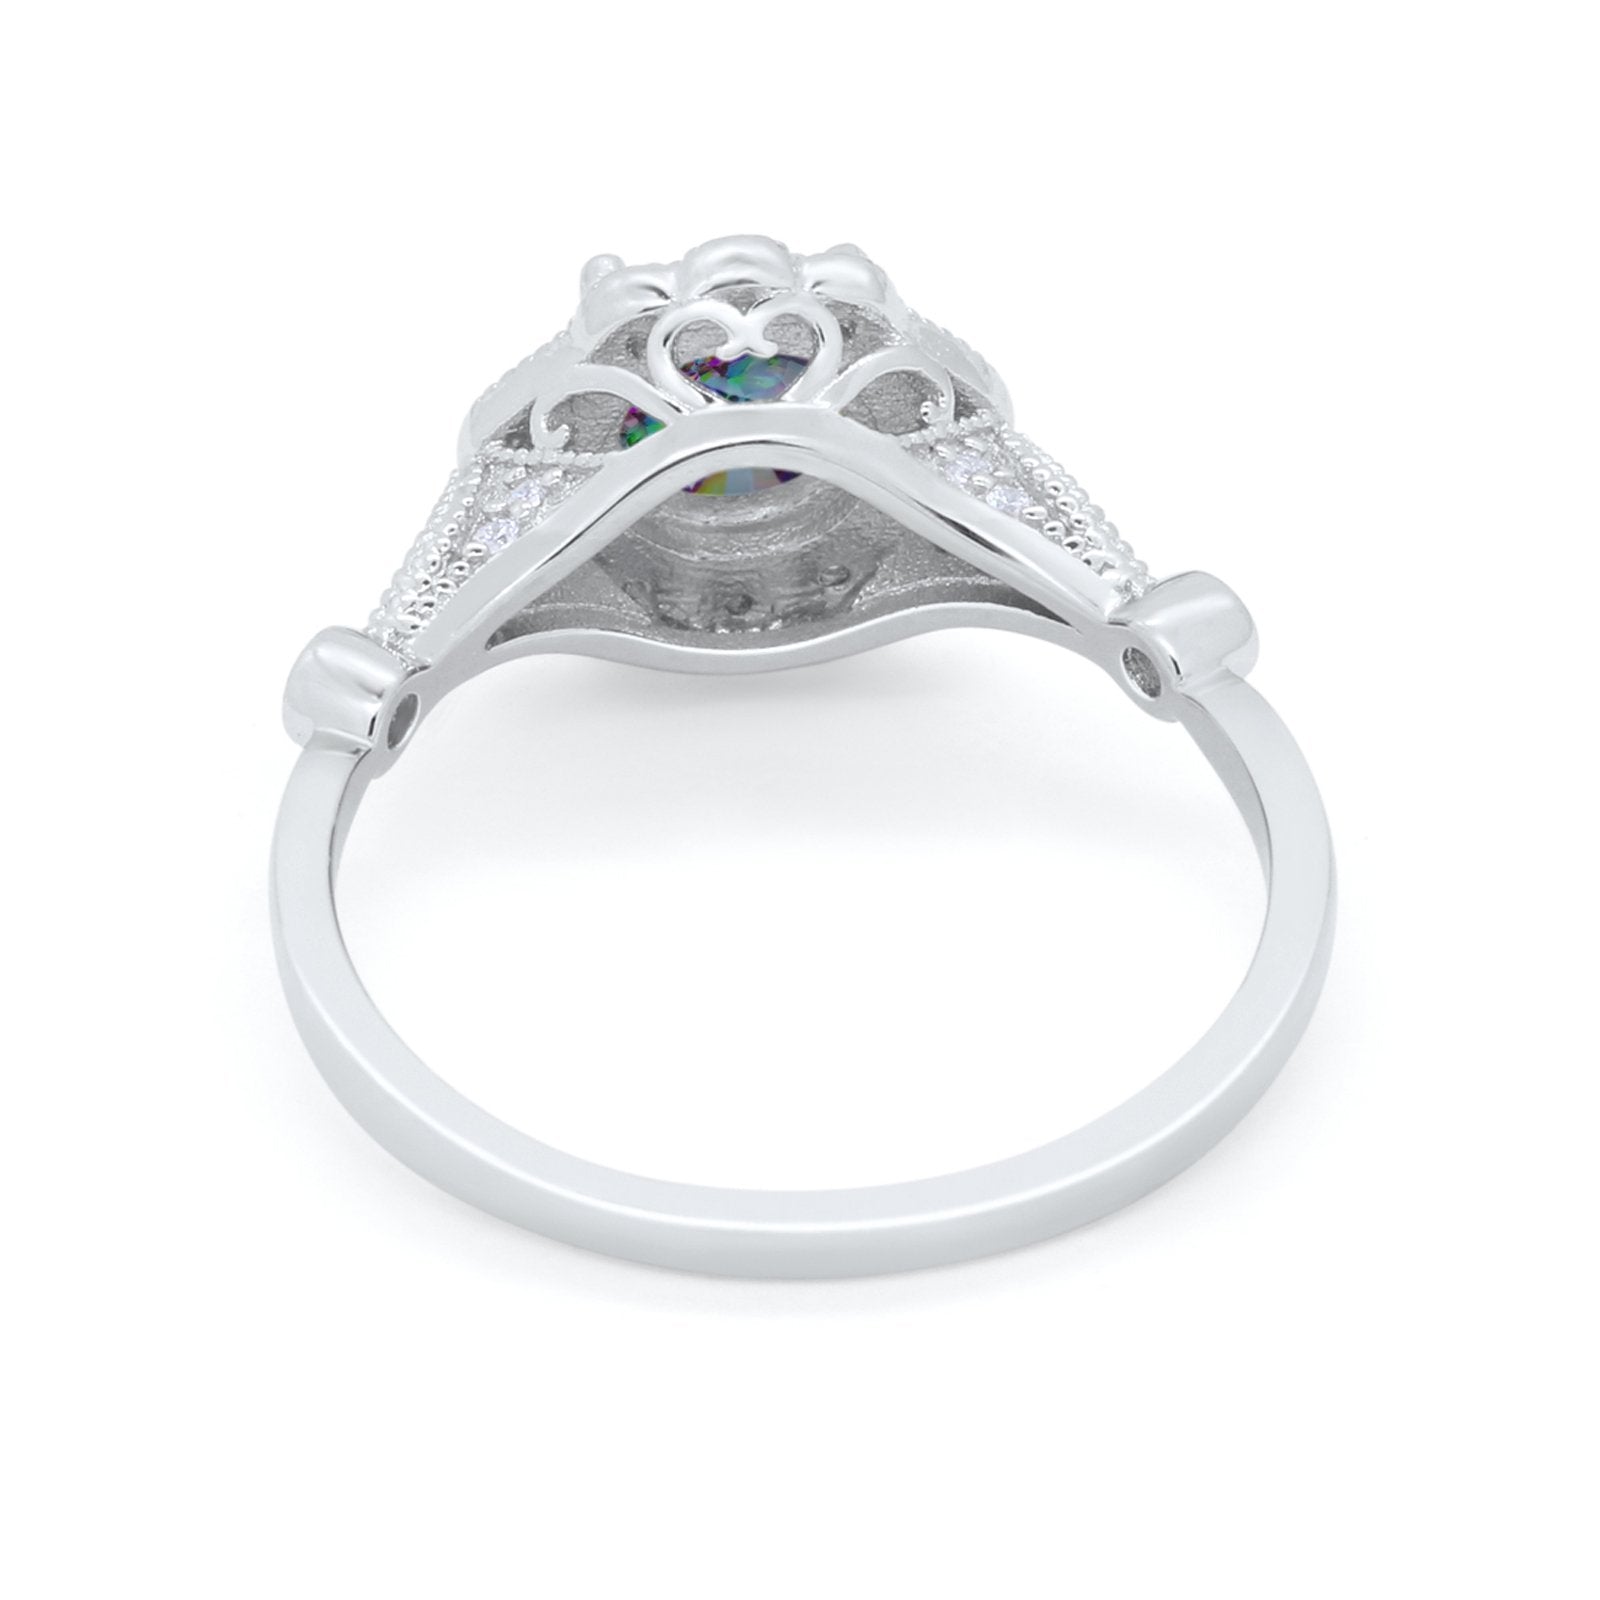 Halo Vintage Style Engagement Ring Simulated Rainbow CZ 925 Sterling Silver